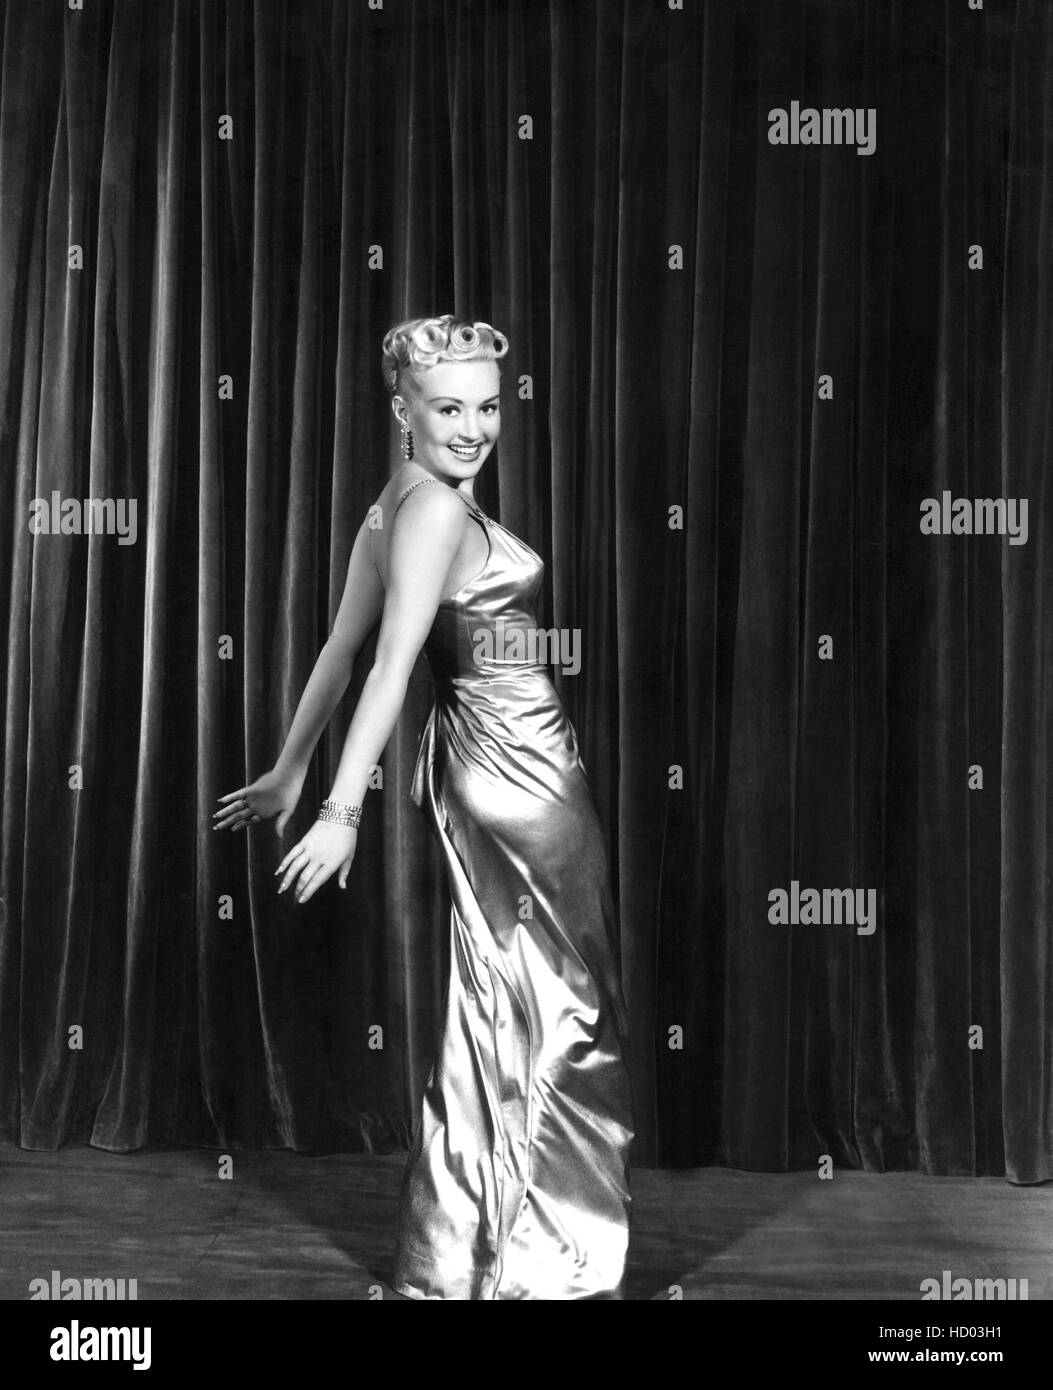 Betty Grable Stock Photo